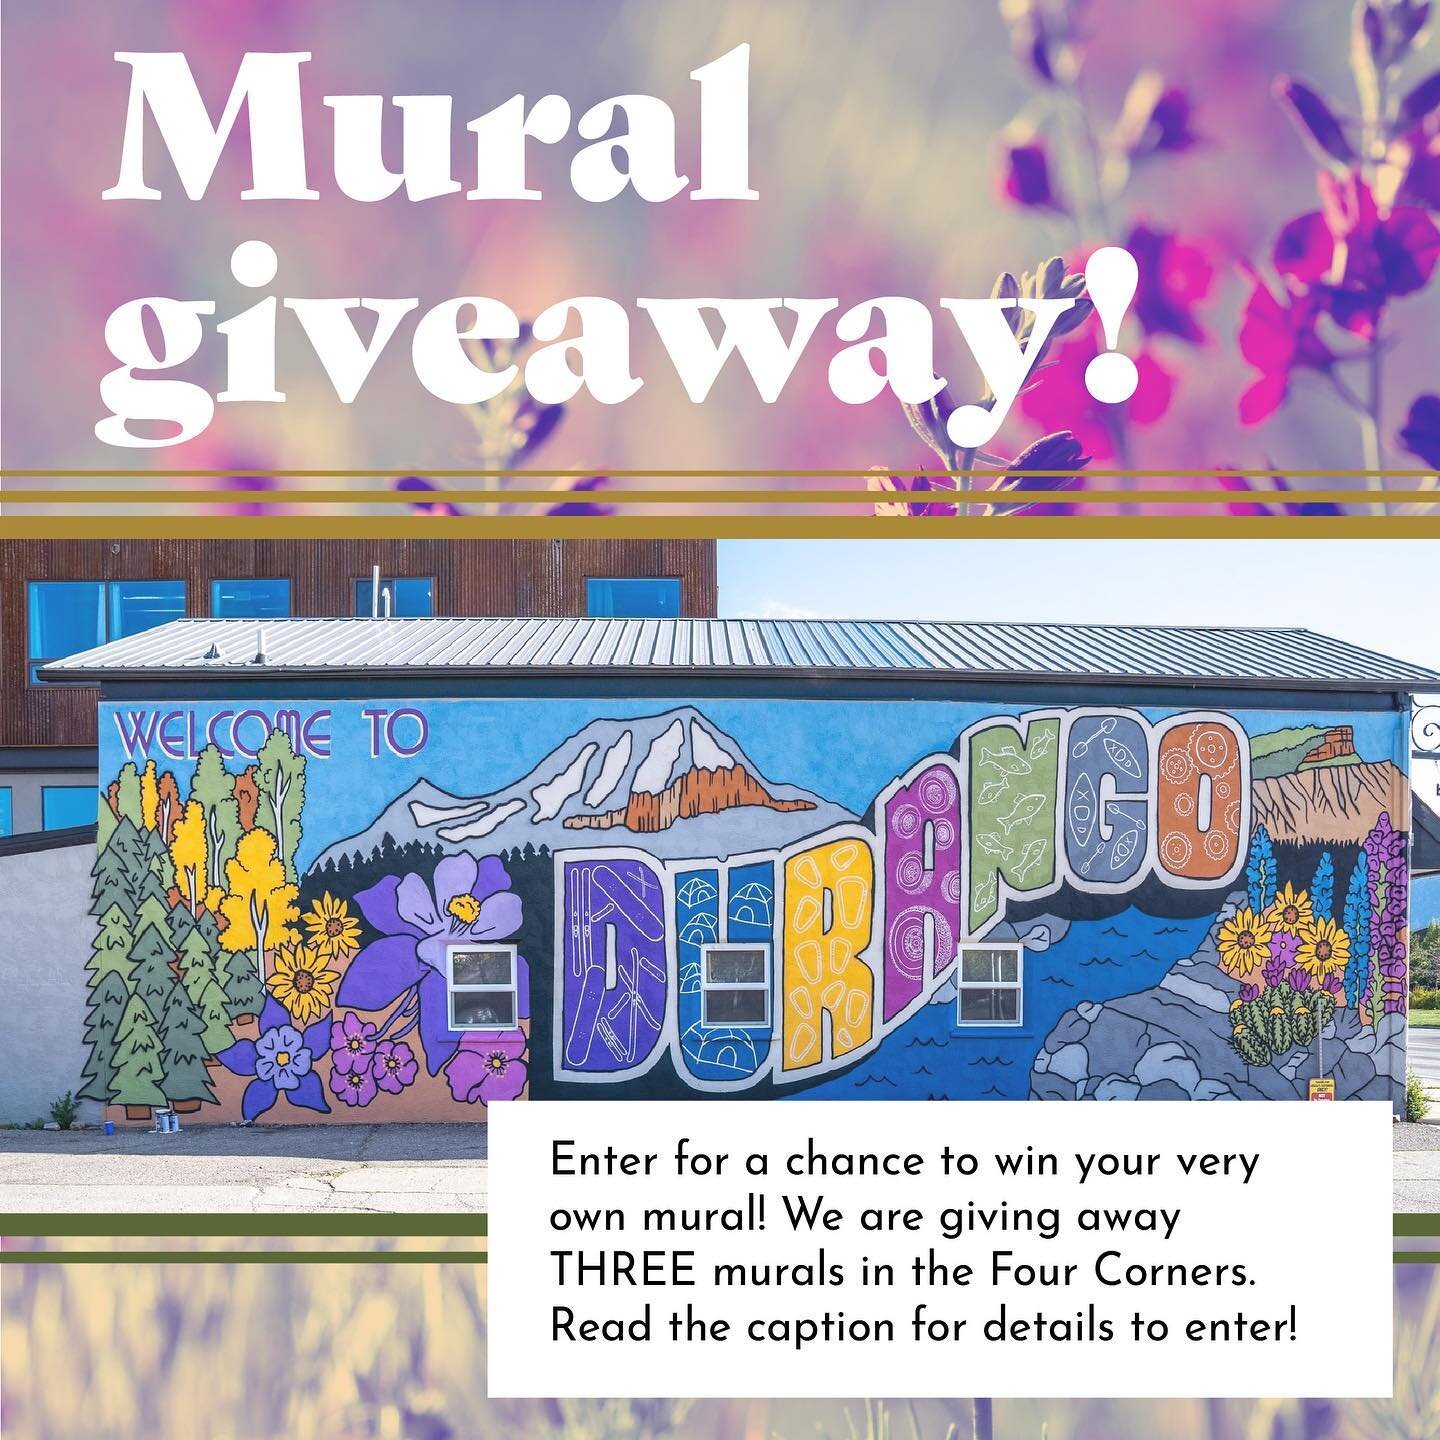 MLD is giving away THREE FREE murals! 
To enter, make sure you&rsquo;re following @monicalouisedesign and tag three friends in the comments of this photo. THAT&rsquo;S IT!!! You&rsquo;ll also get THREE extra entries if you go to my website (link in b